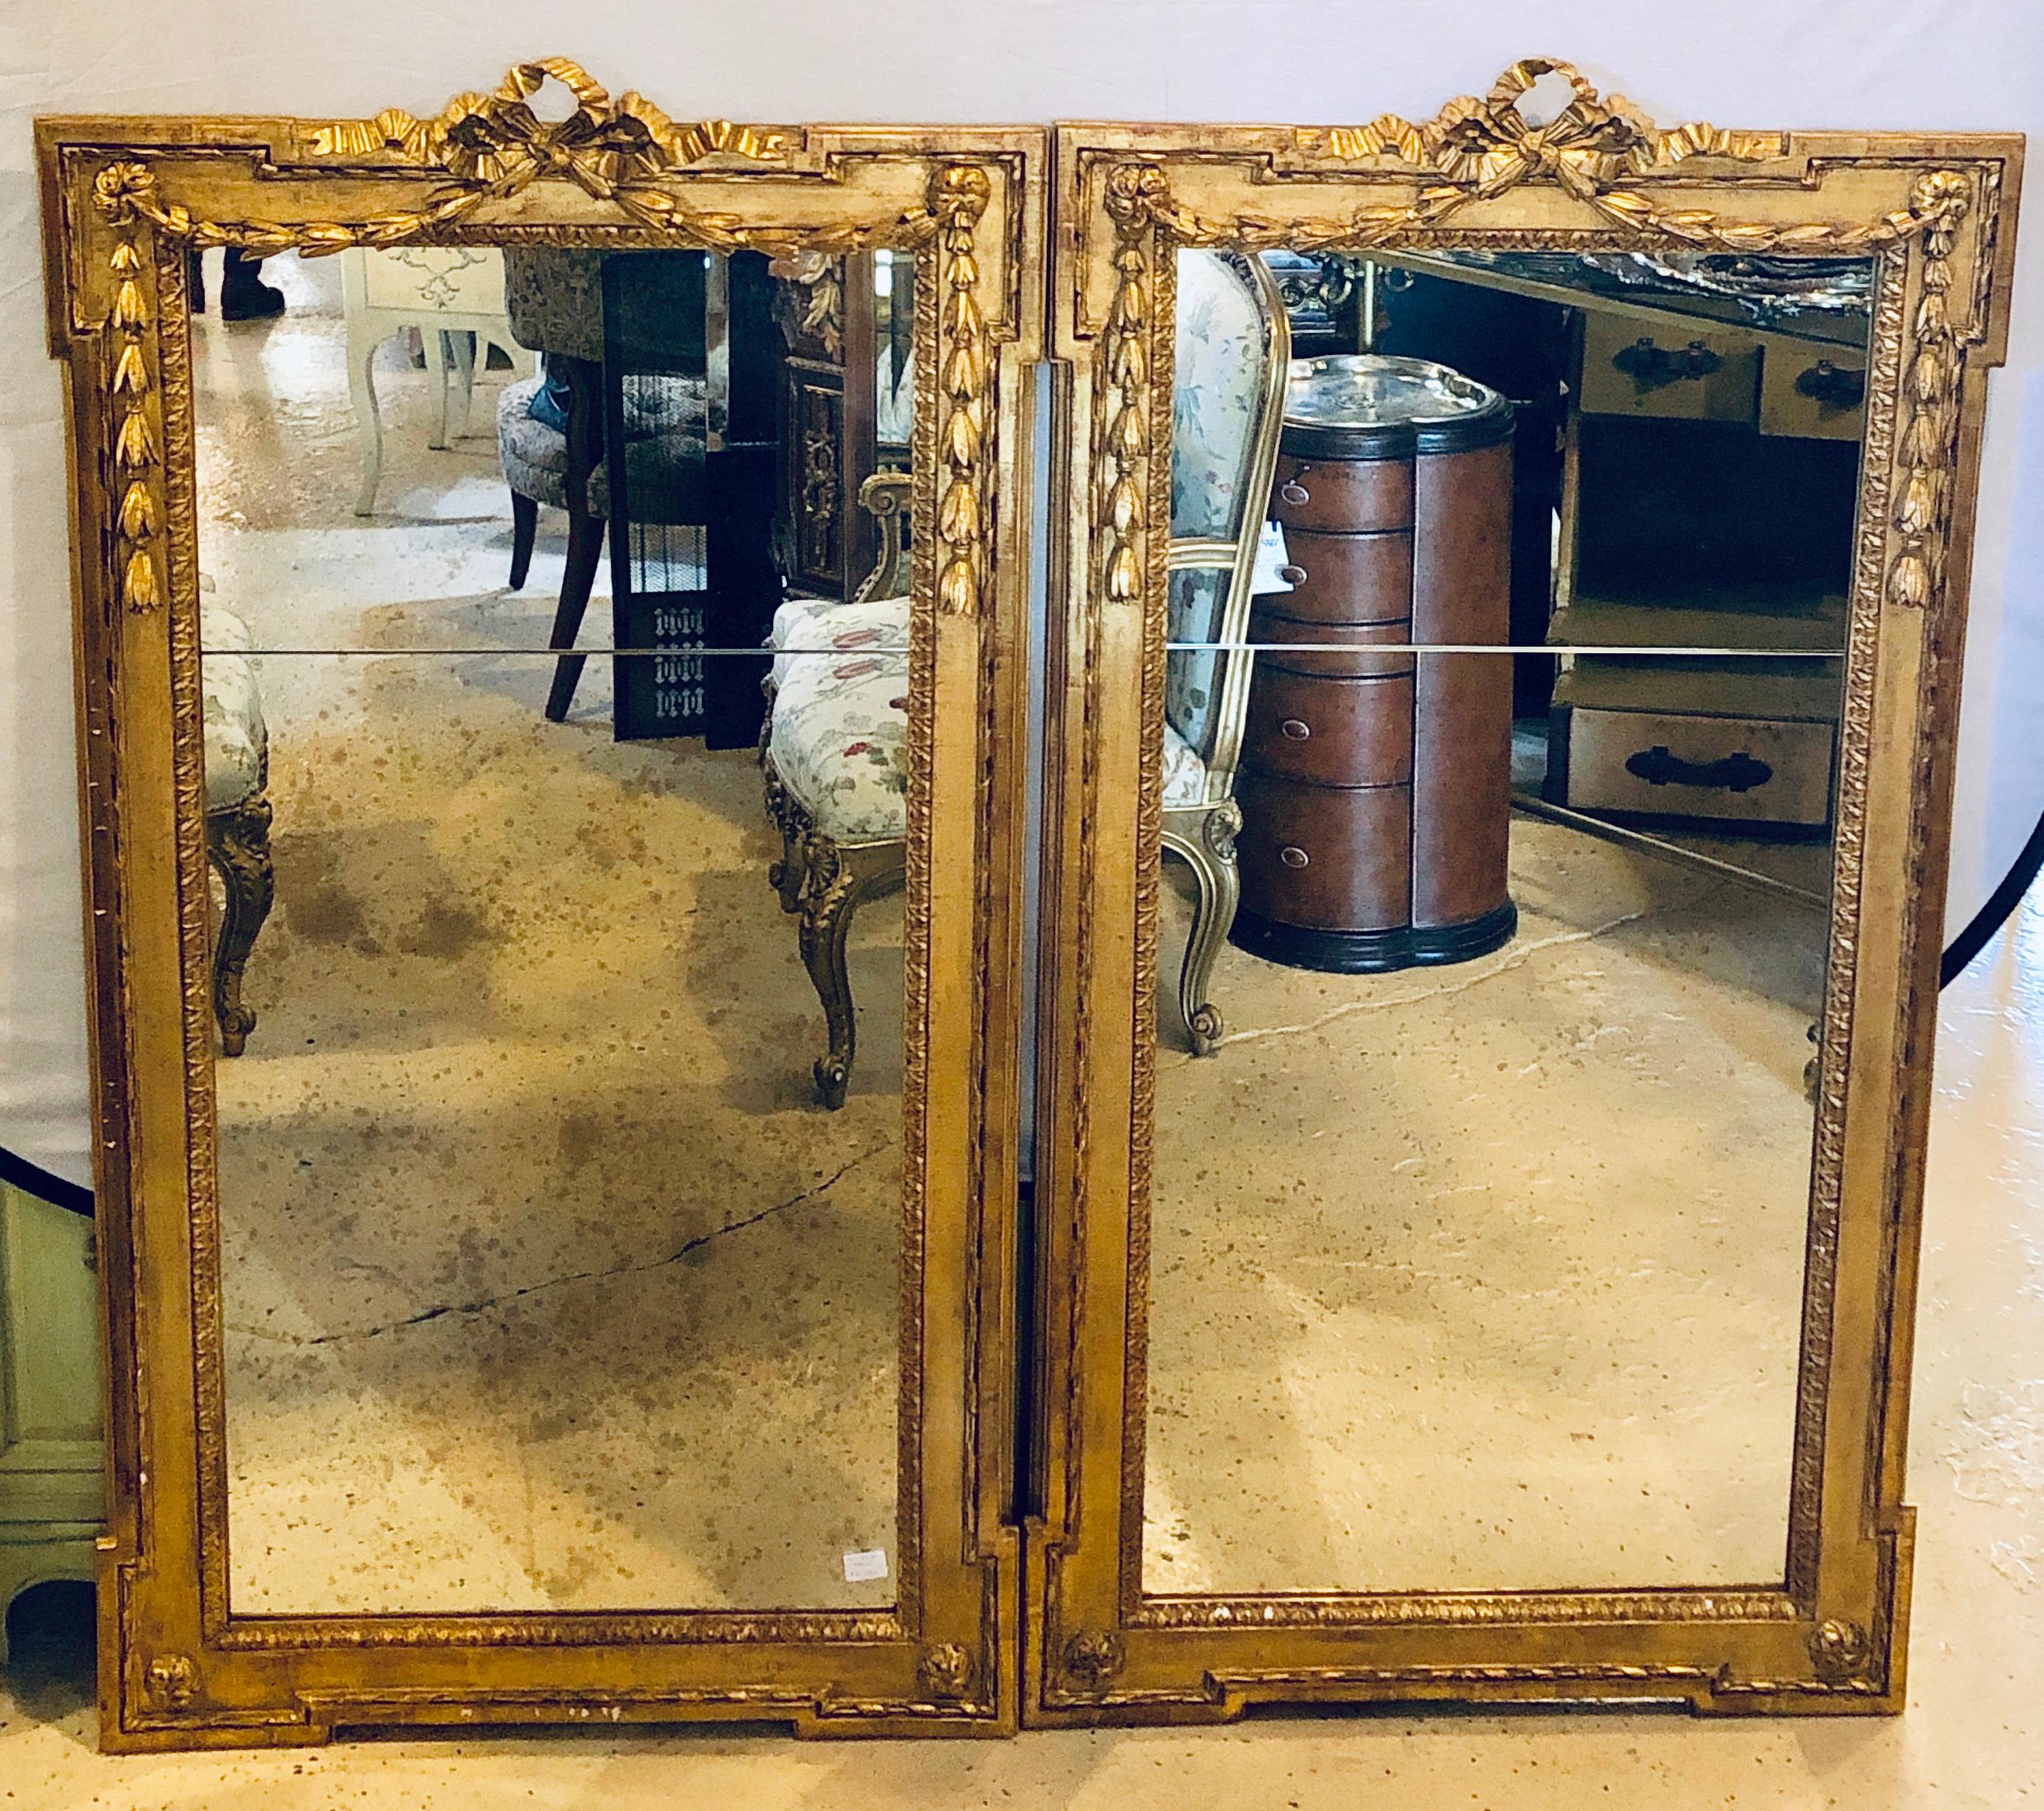 Pair of large and impressive Louis XVI style carved gilt gold wooden wall or console/floor mirrors. Each rectangular frame in a carved gilt gold finish terminating in carved wreath and ribbon with bow design. The clear center frame mirror flanked by